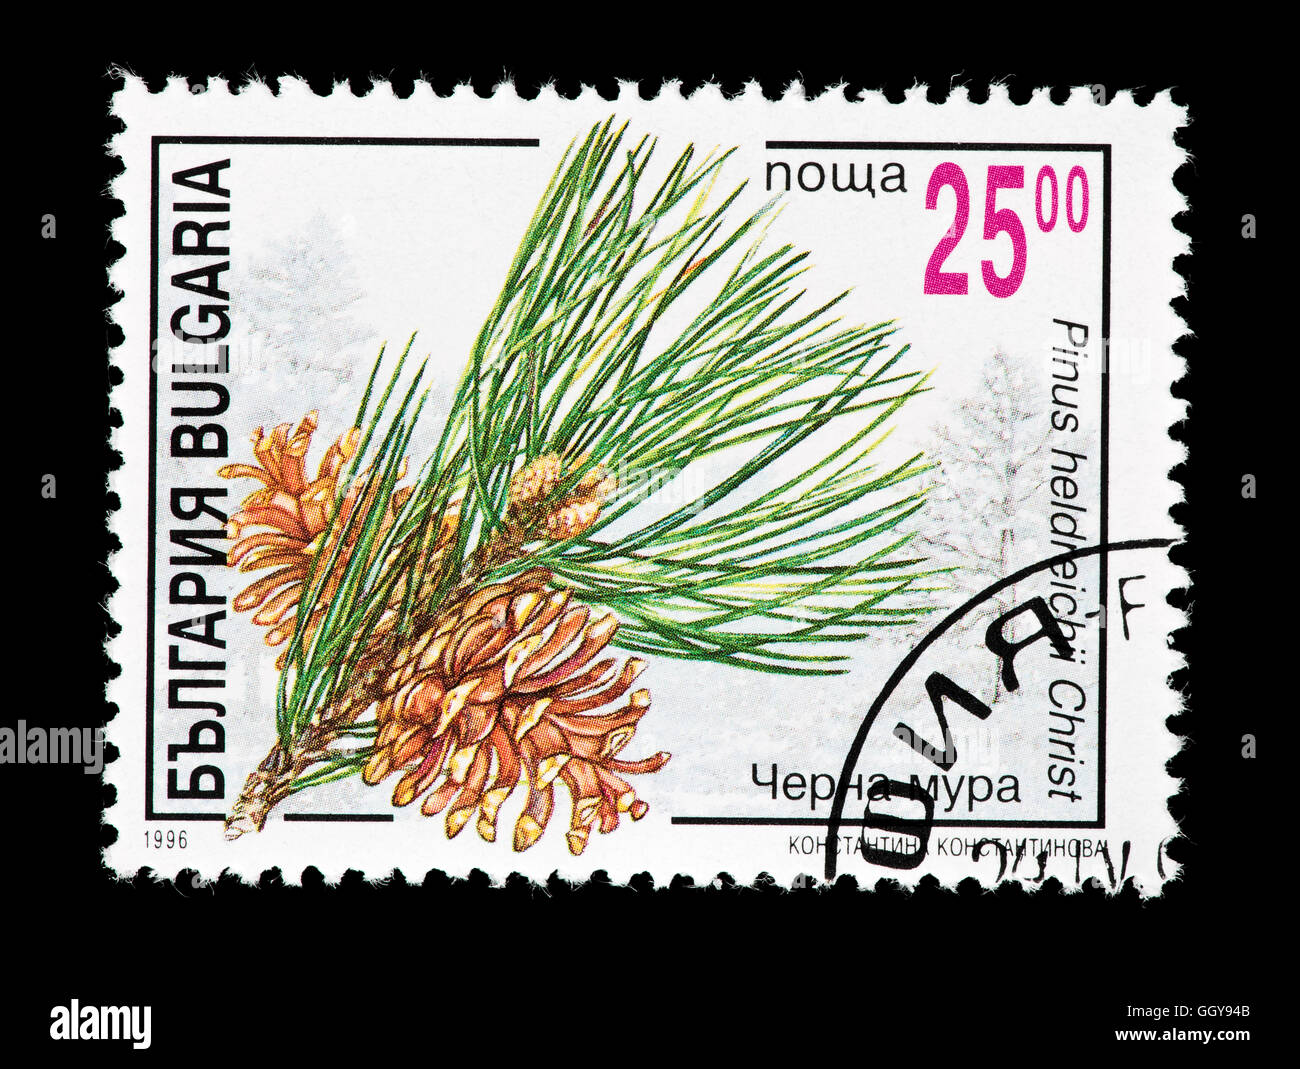 Postage stamp from Bulgaria depicting a the needles and seeds of  Bosnian pine (Pinus heldreichii) Stock Photo